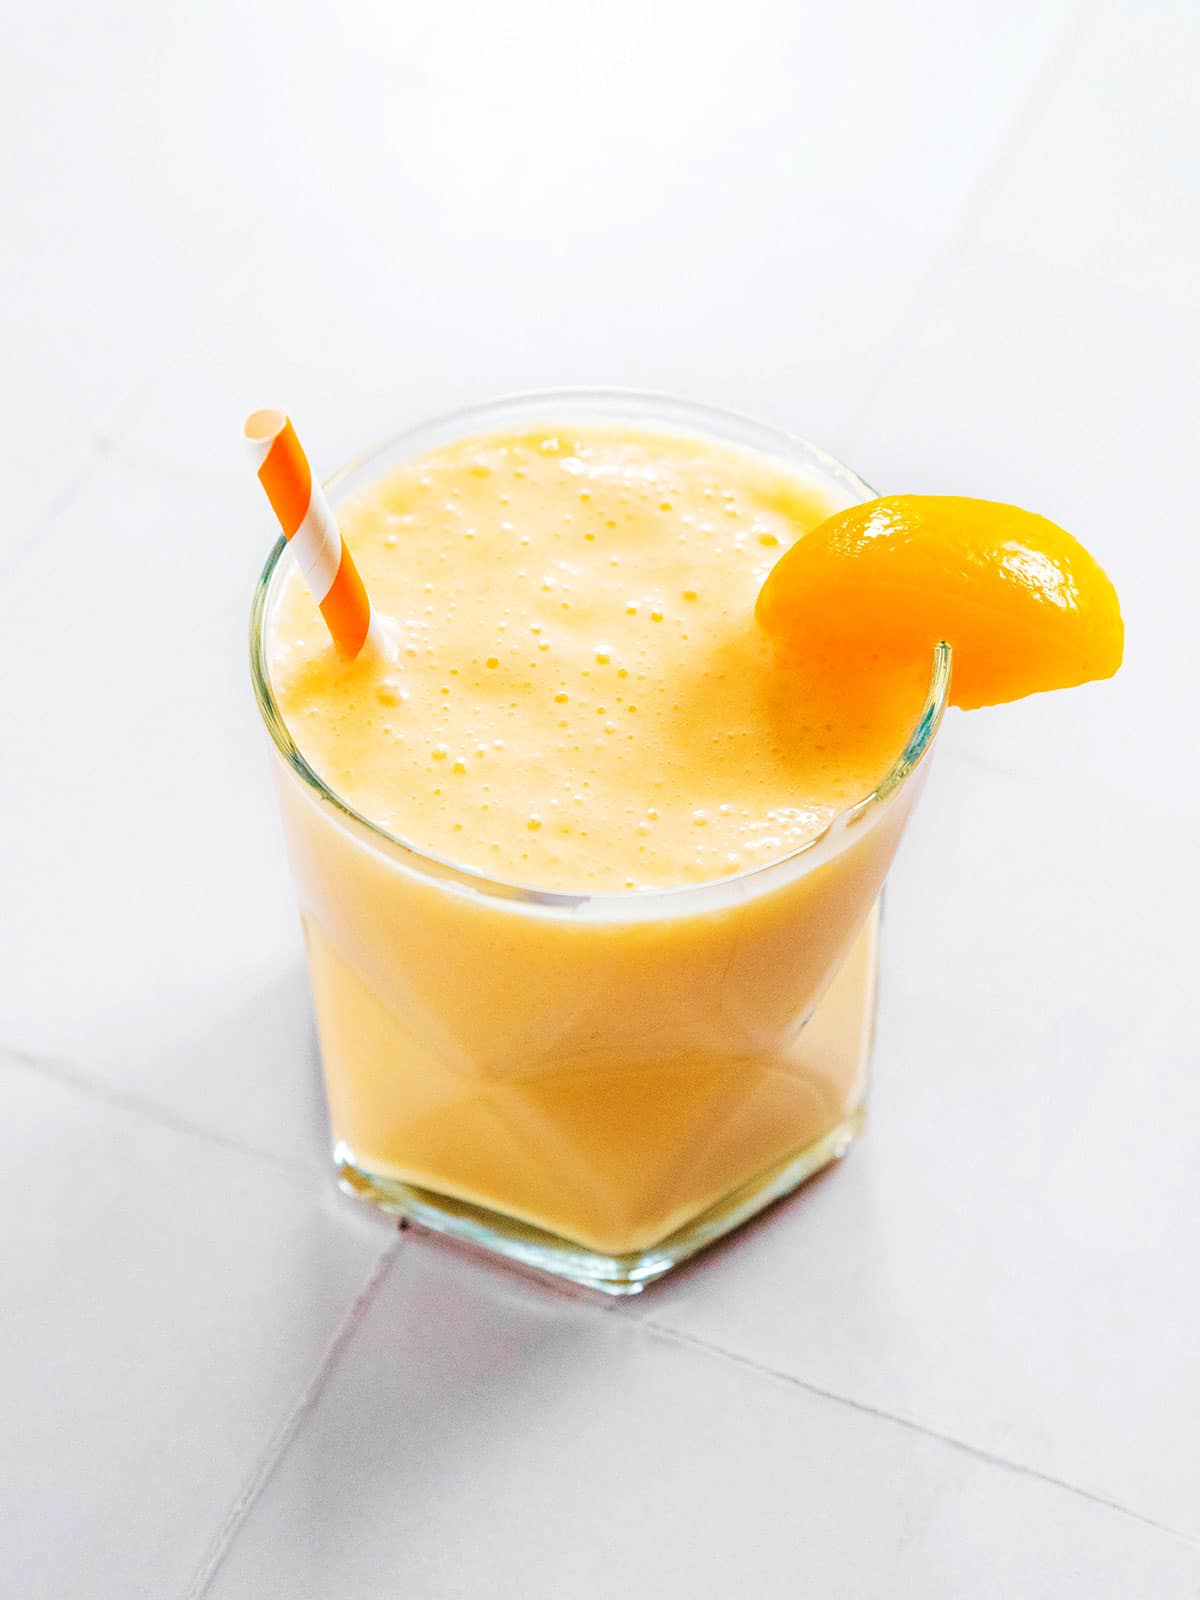 A small glass of peach kefir with a straw and a peach slice on the rim.